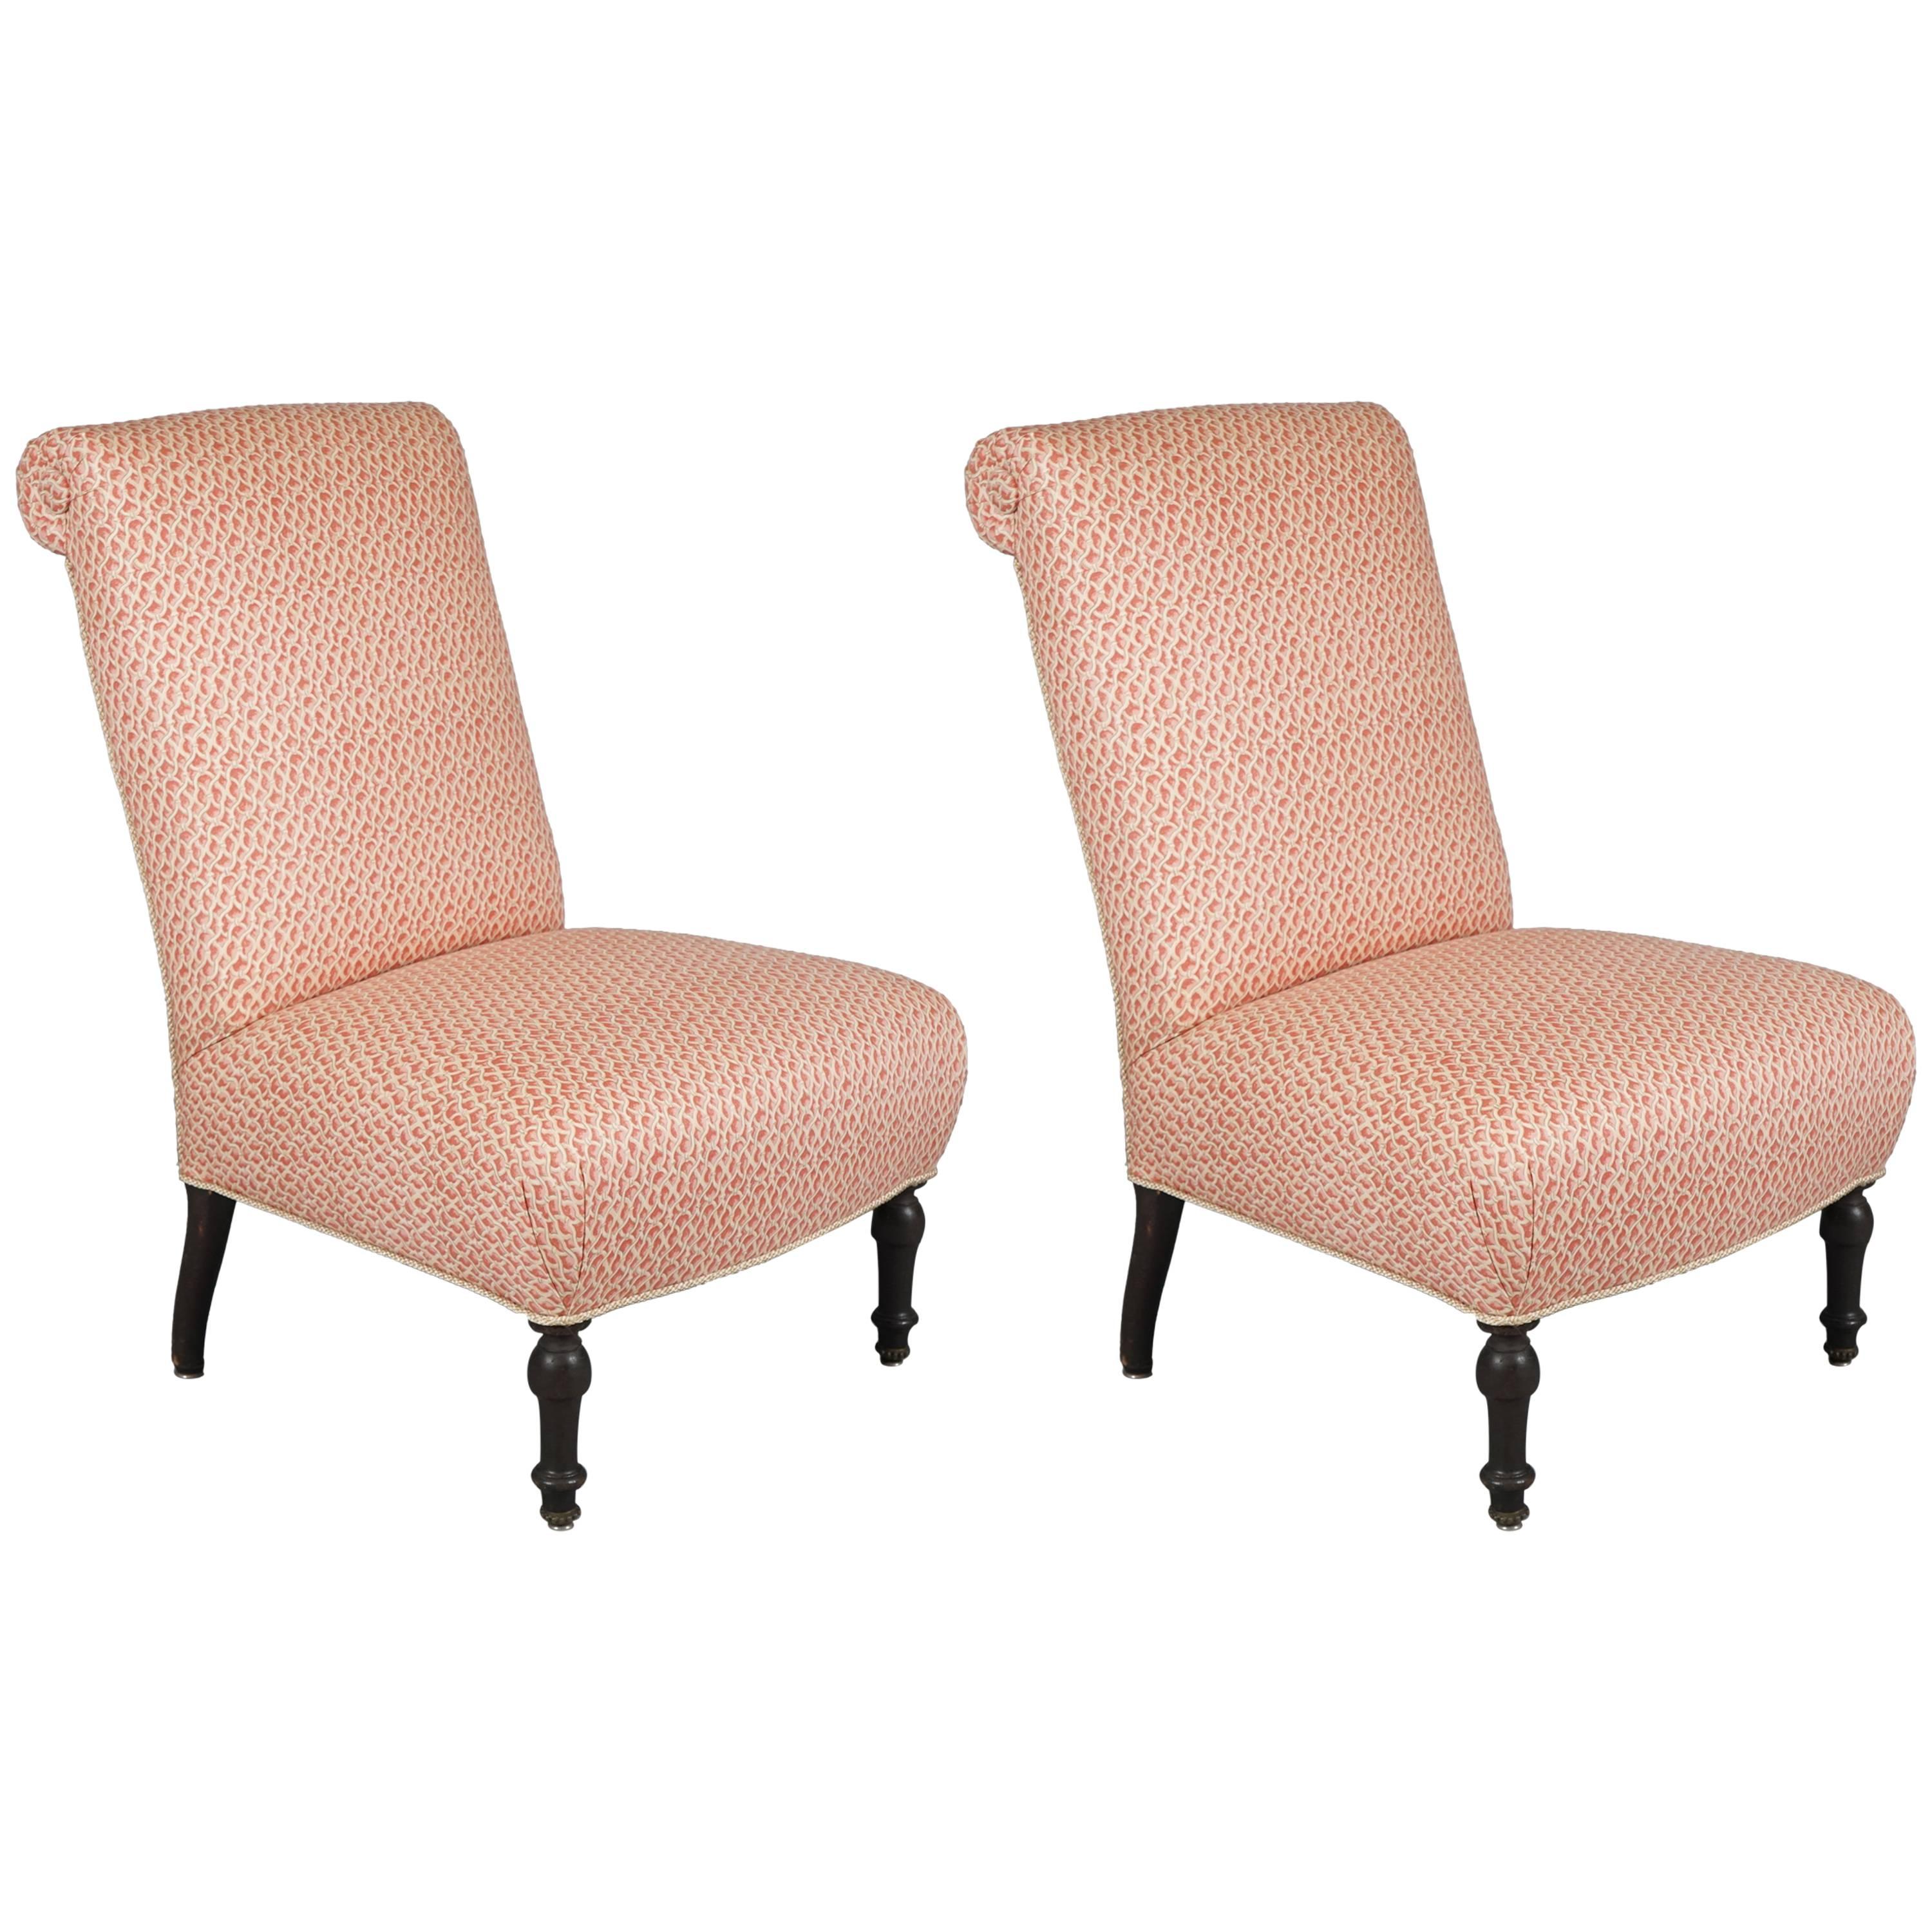 Pair of Upholstered French Slipper Chairs